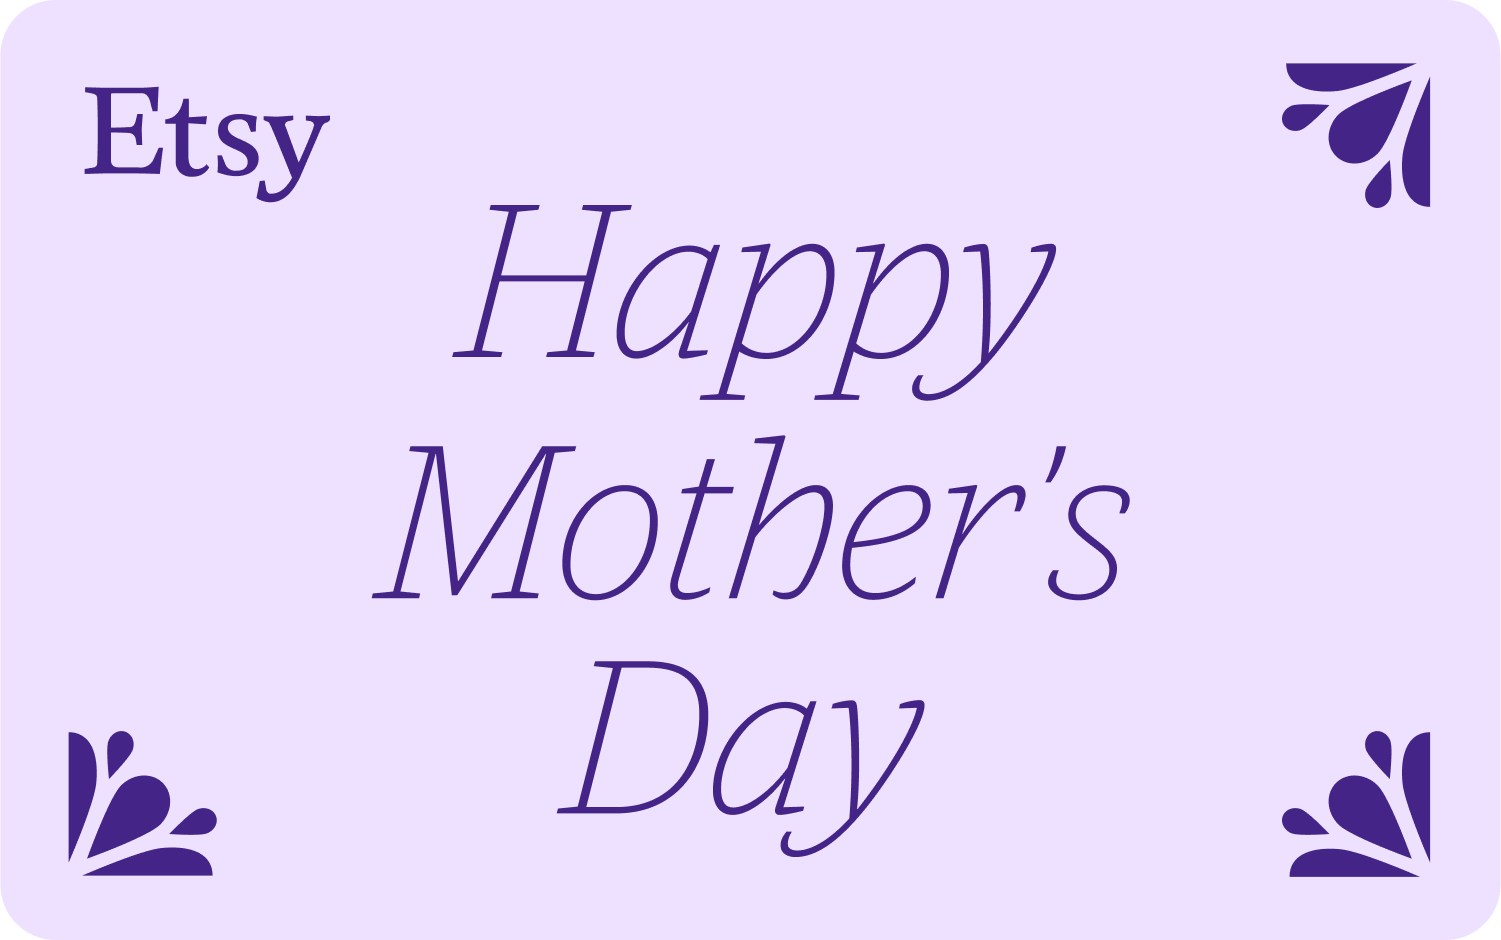 Illustration of a lavender background with flowers in the bottom and top right corners in purple with the Etsy logo on the top left corner and Happy Mother's Day in the center in purple font